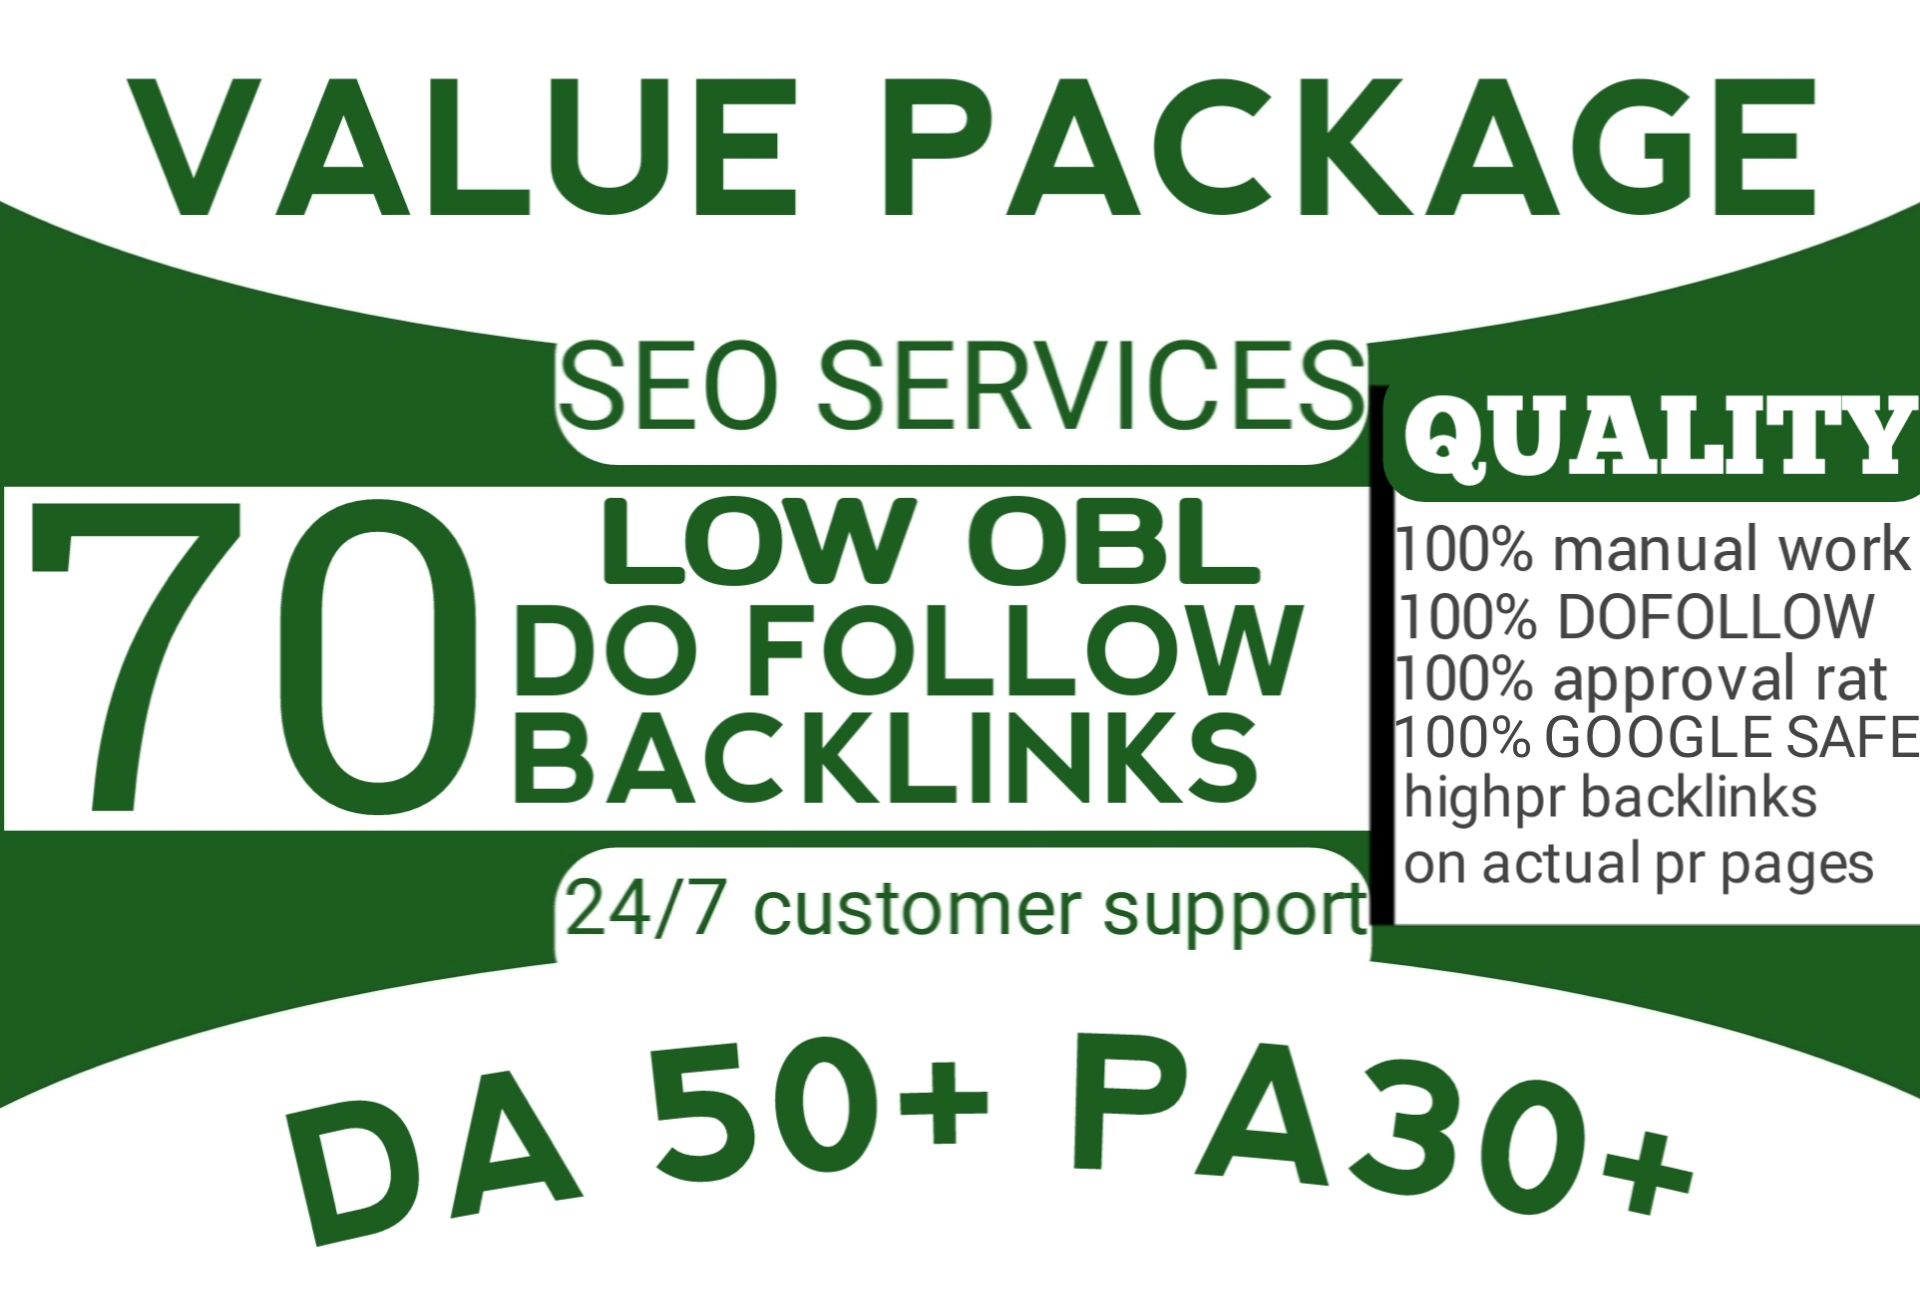 will provide 70 links of DA 50+ with unique domains and low obl 